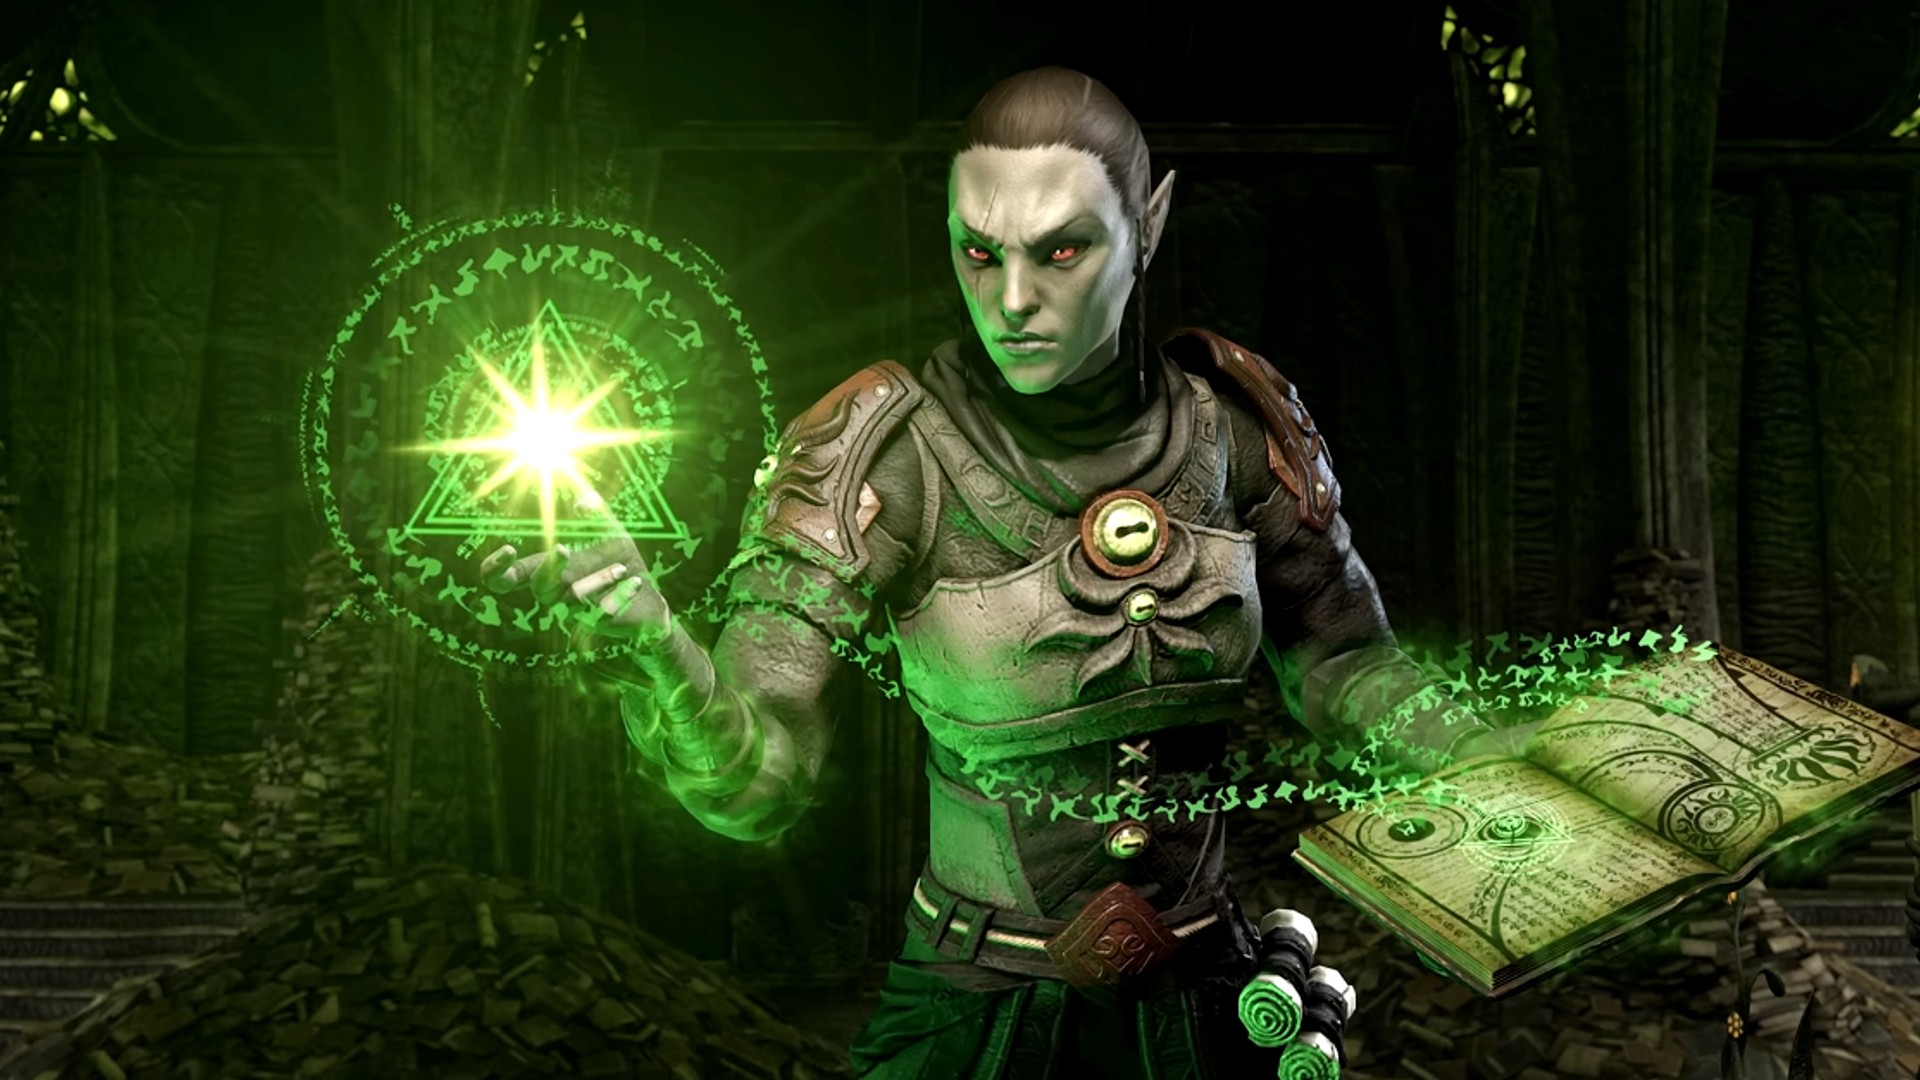 Elder Scrolls Online: Necrom release date, new class, trial, and more